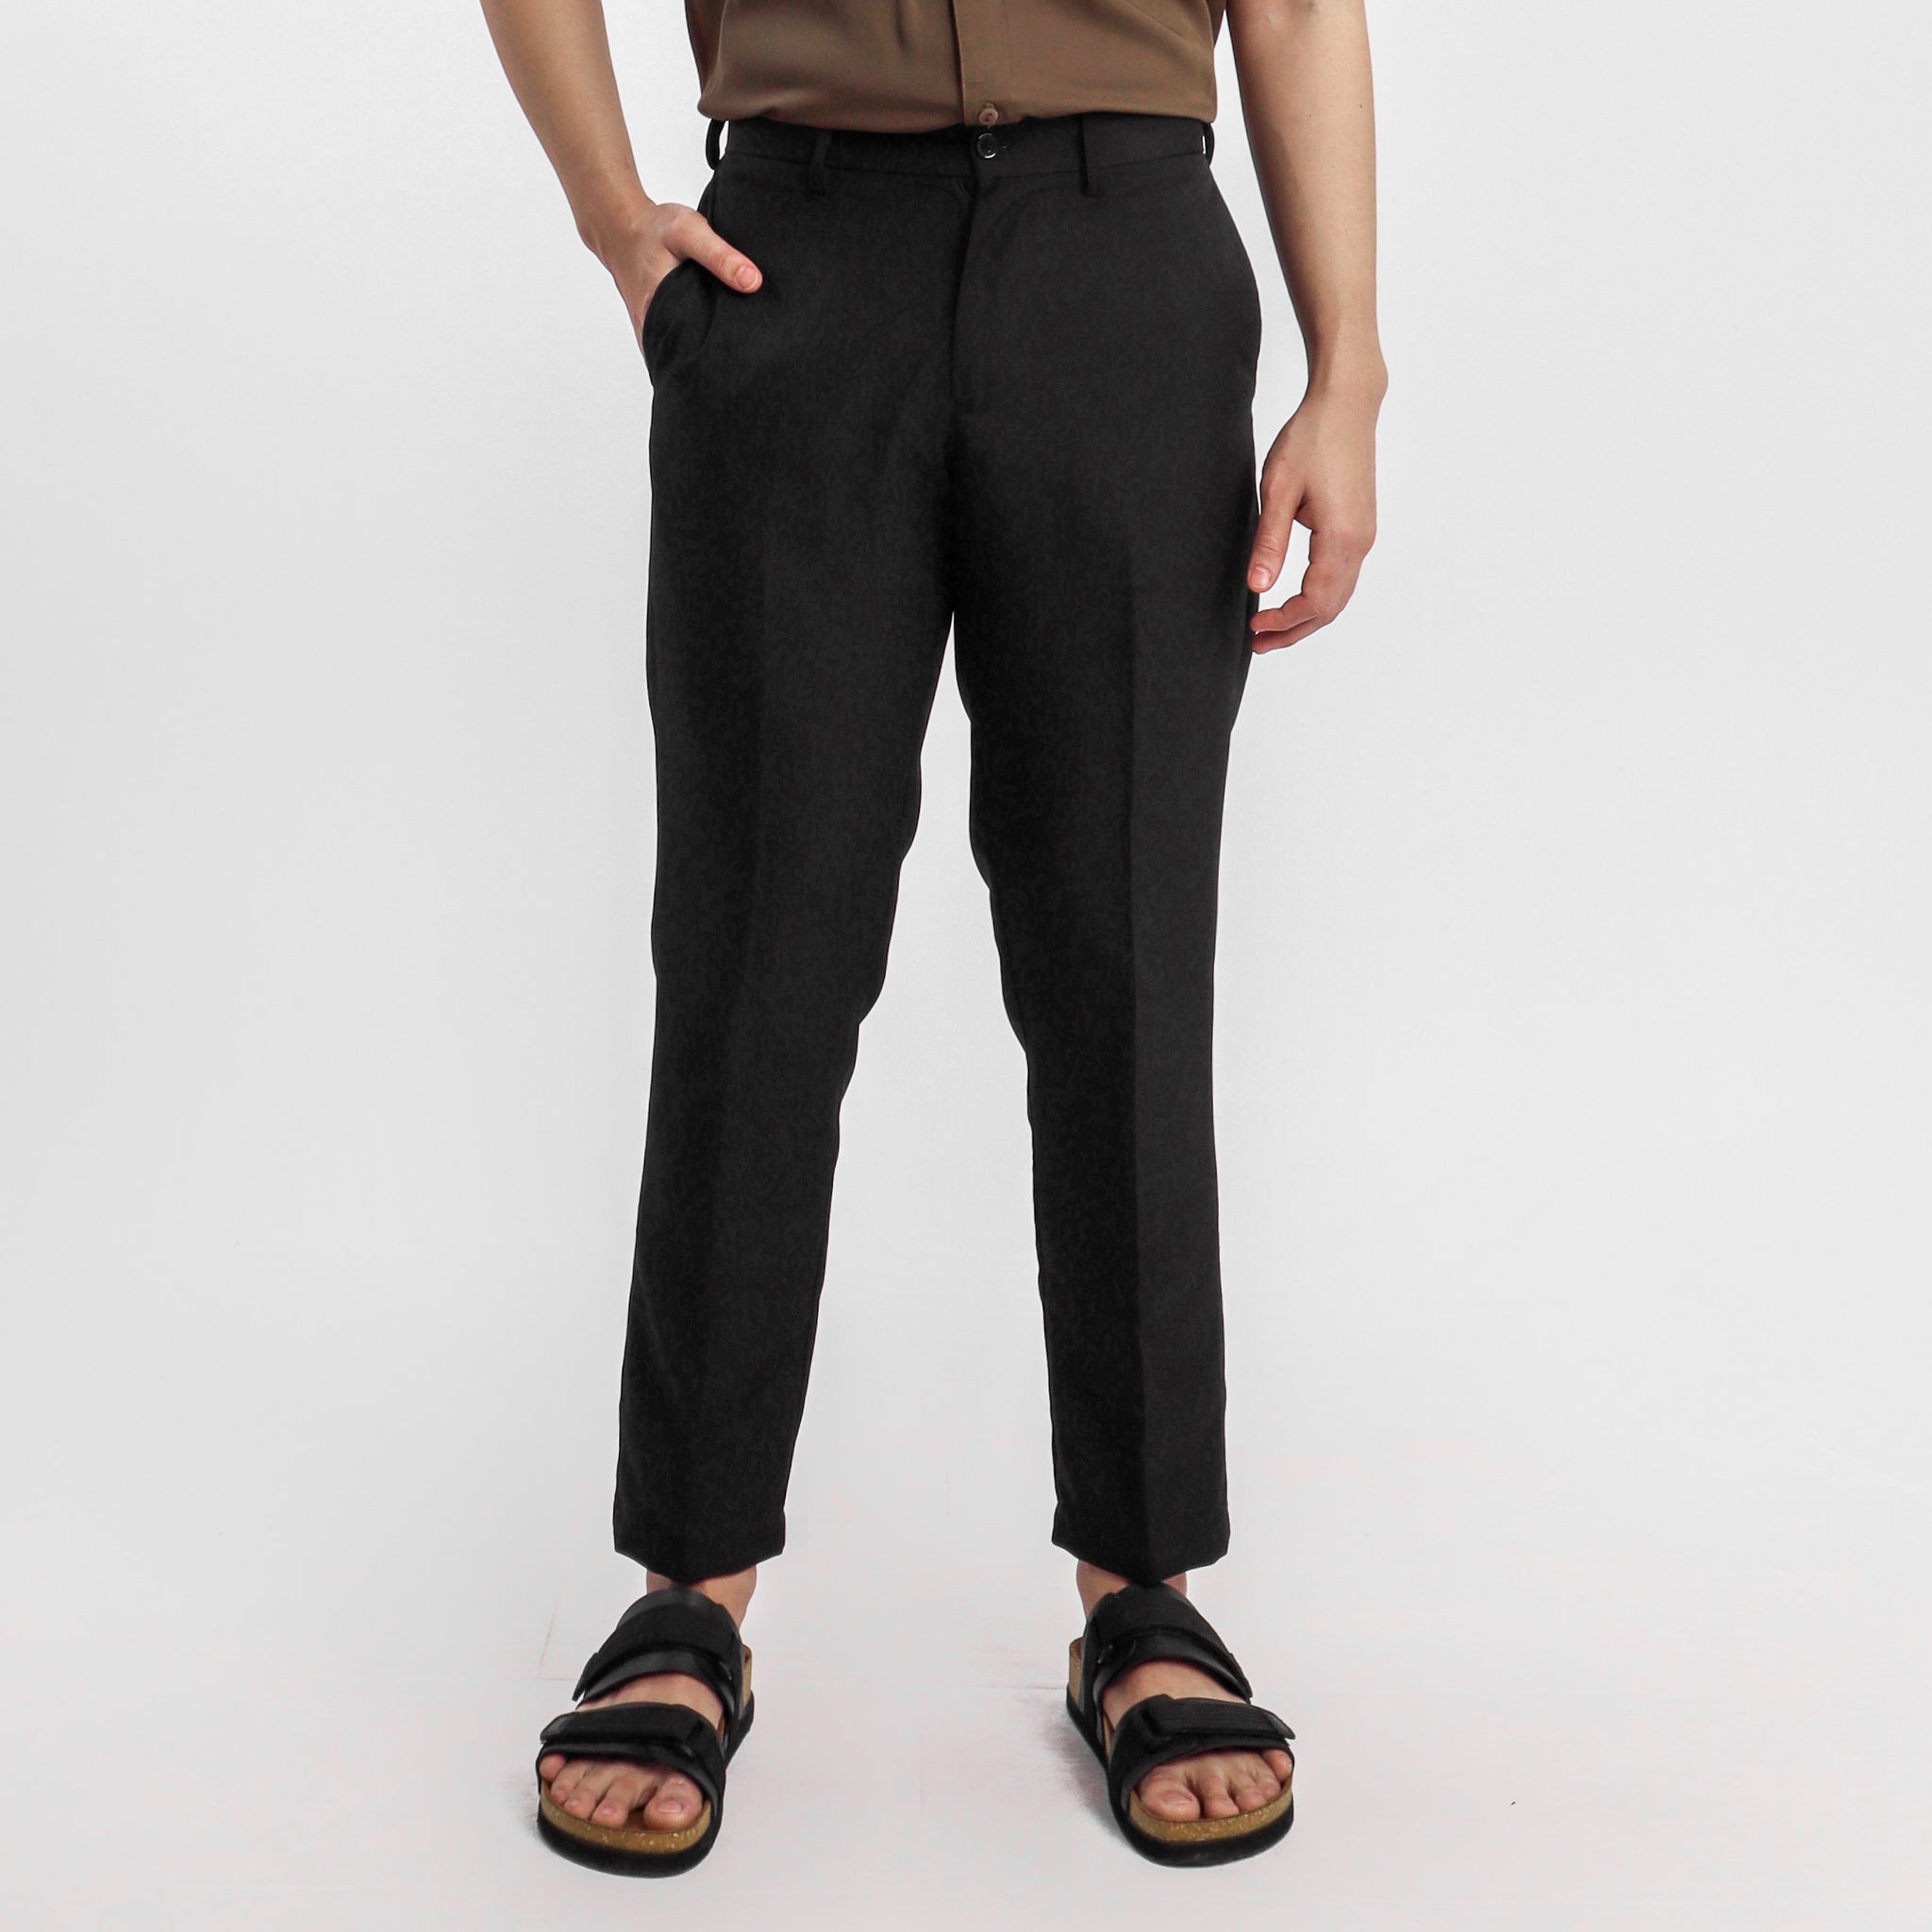 Pants with strap and ankle slit - VERY SIMPLE - Pellecchia Store